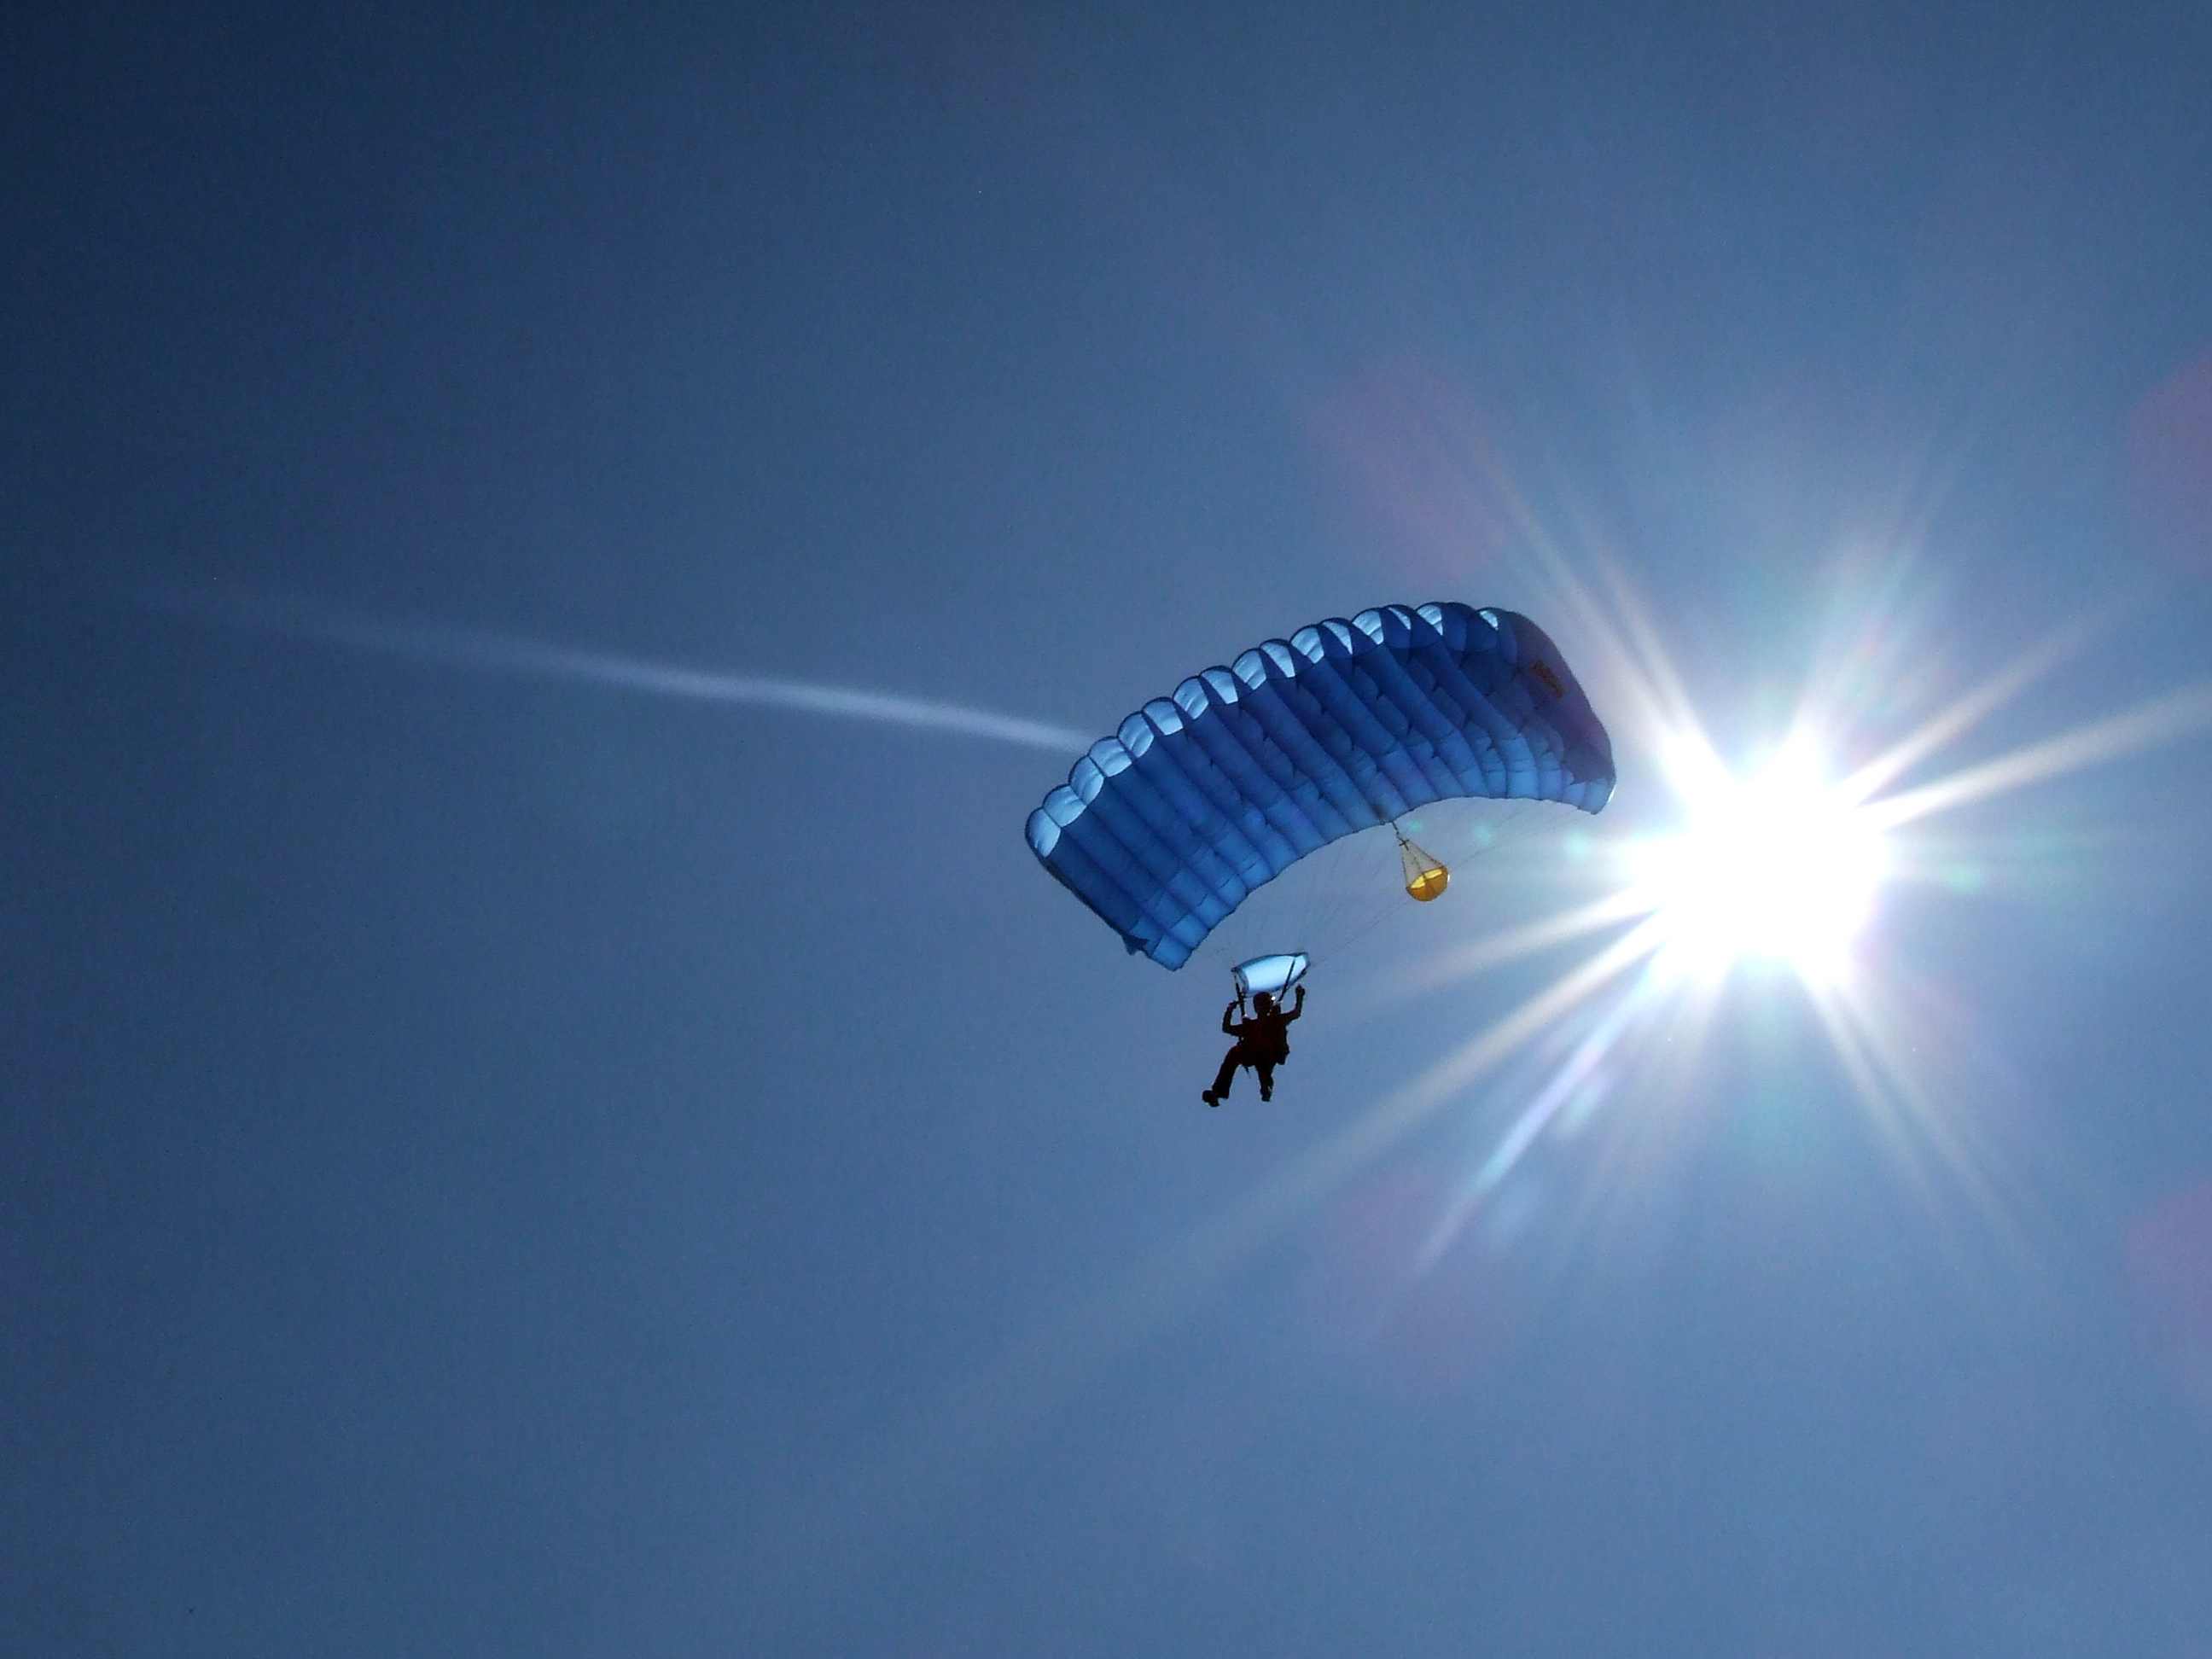 Fantastic Skydiving Picture as Diana Parachutes out of the Sun